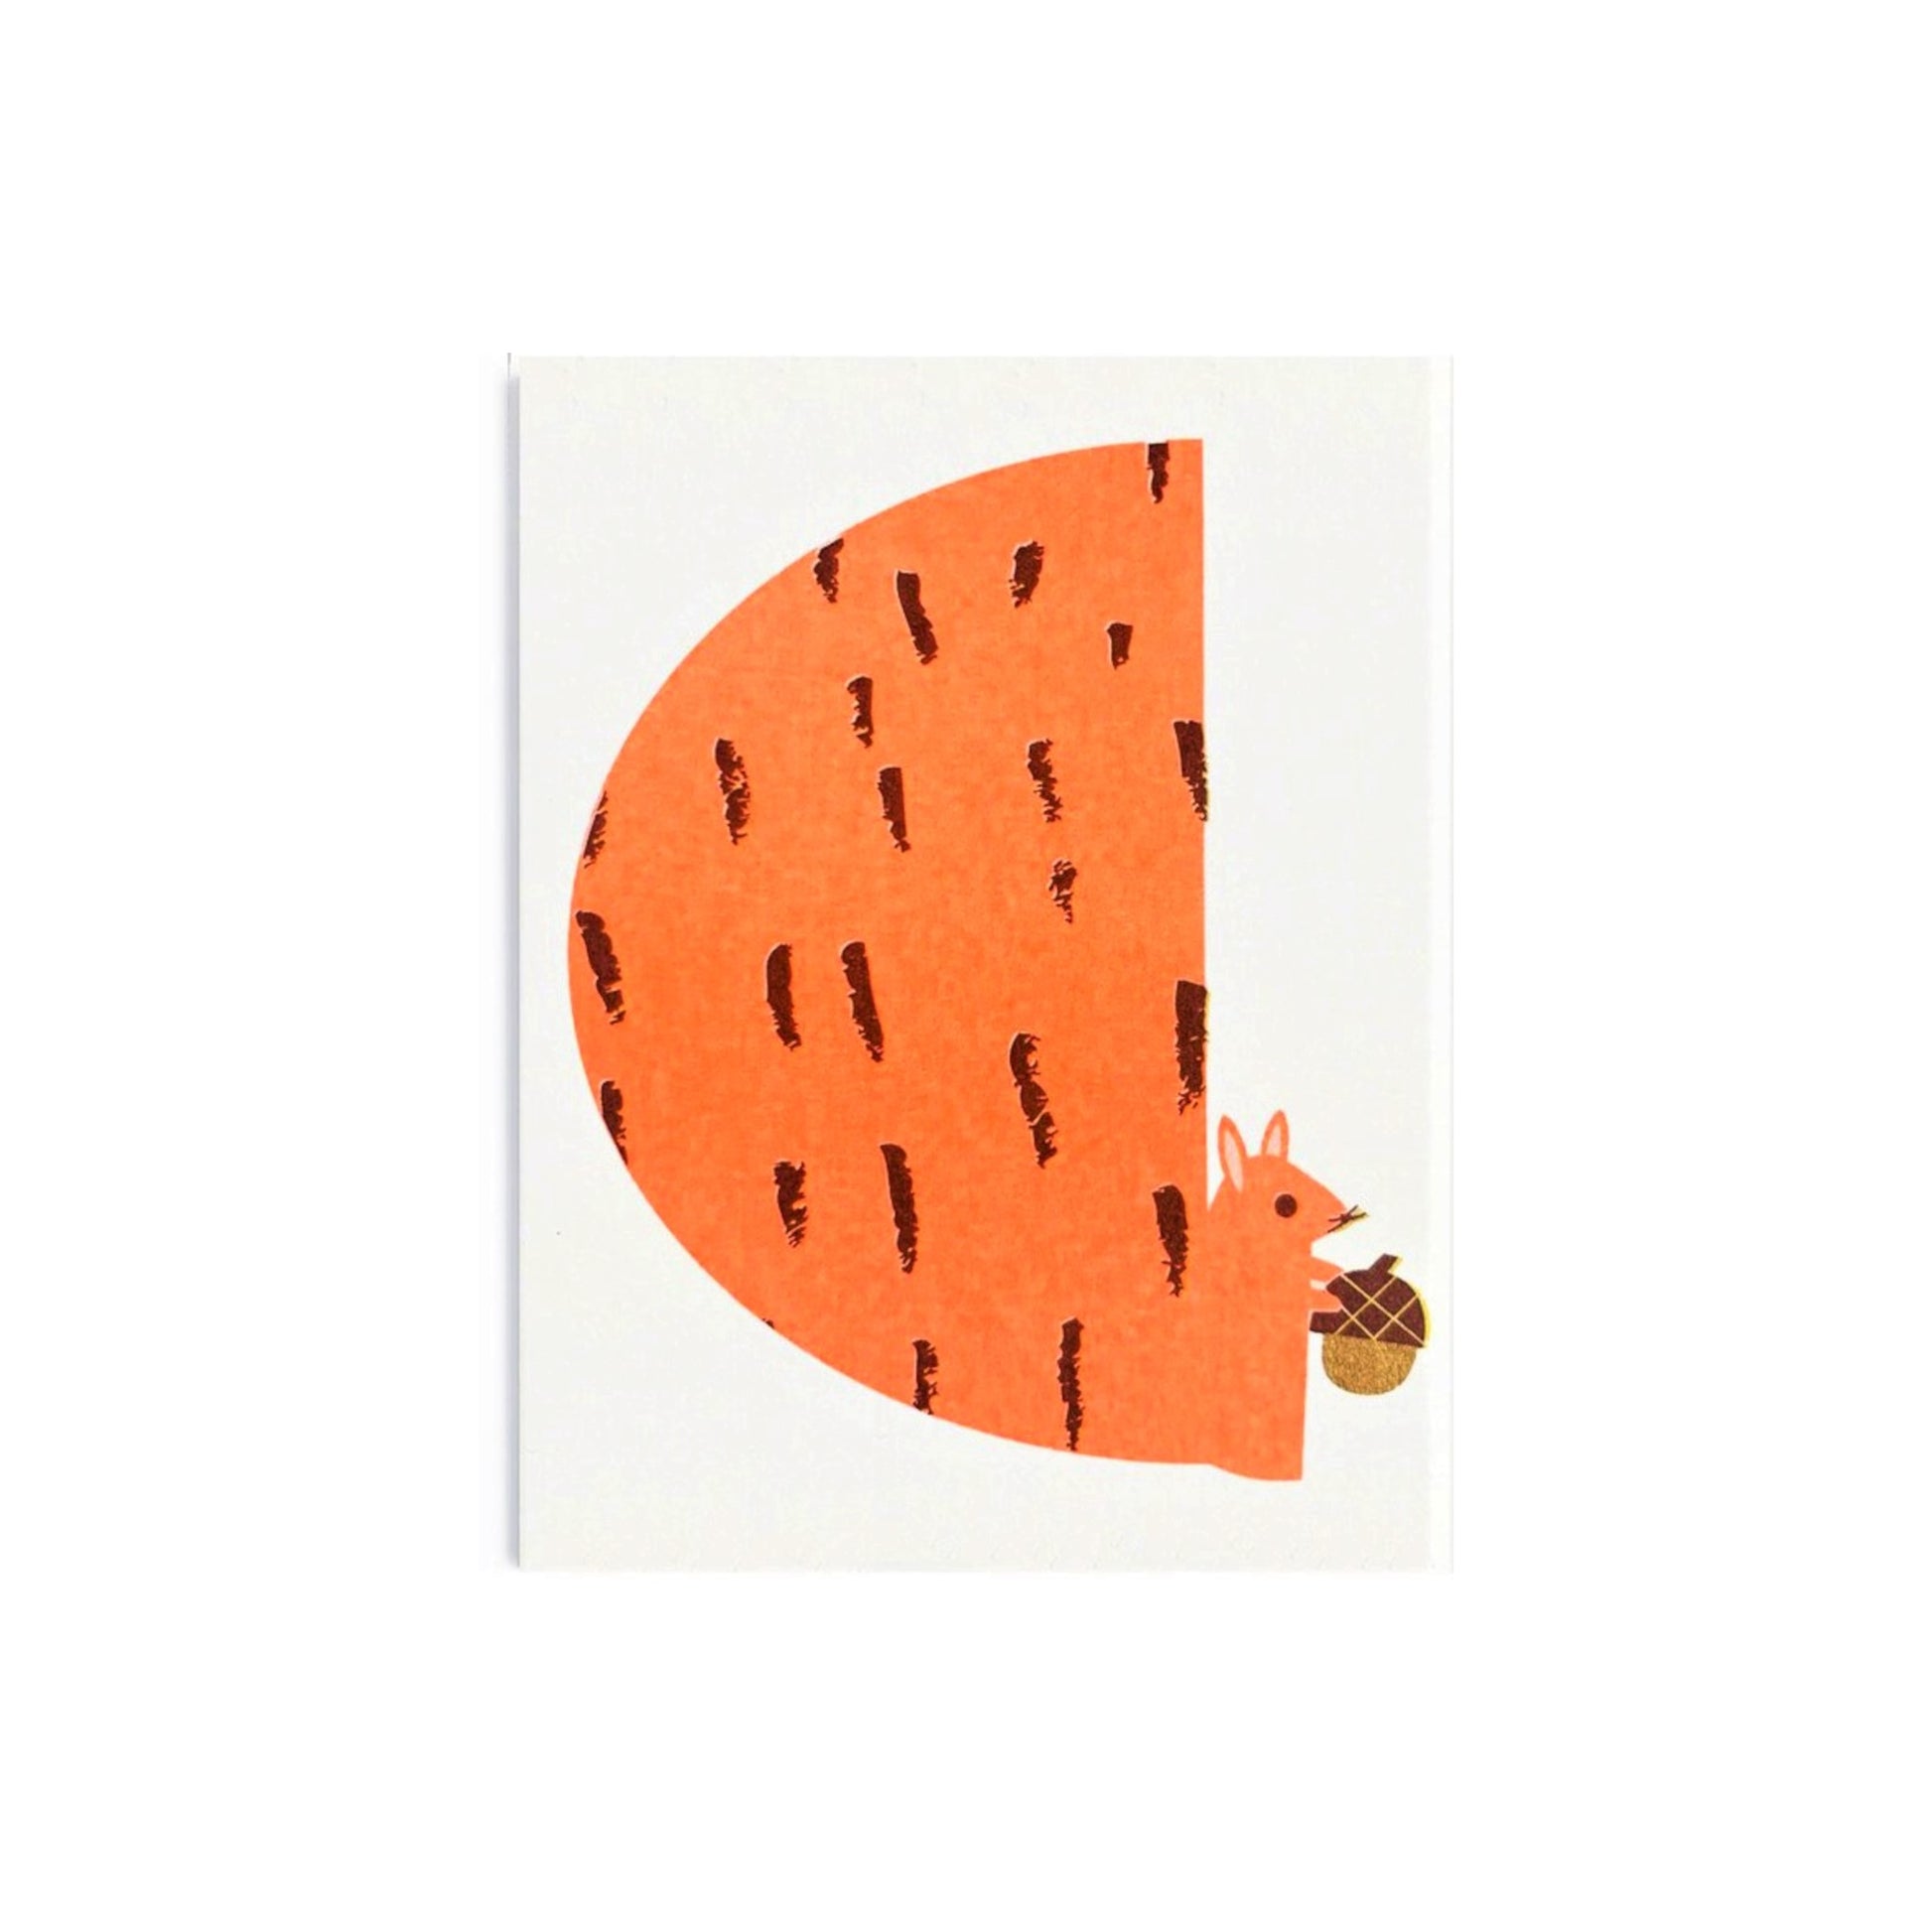 Mini greetings card with an image of an orange squirrel eating an acorn. By Scout Editions.